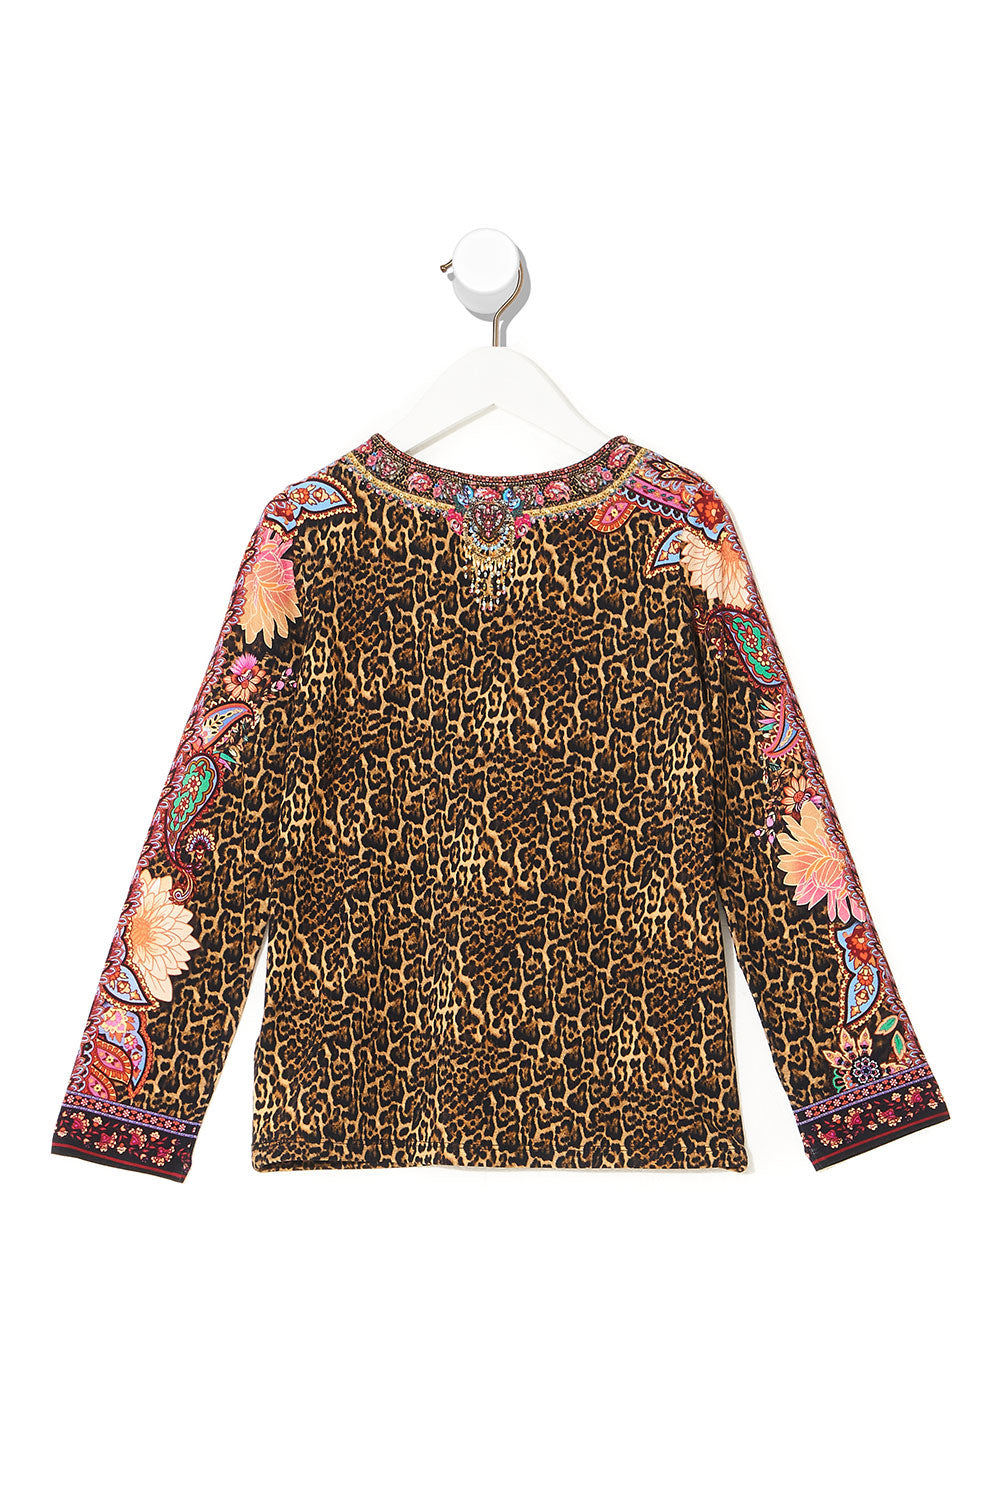 KIDS FITTED LONG SLEEVE TOP 12-14 MAYFAIR MARY